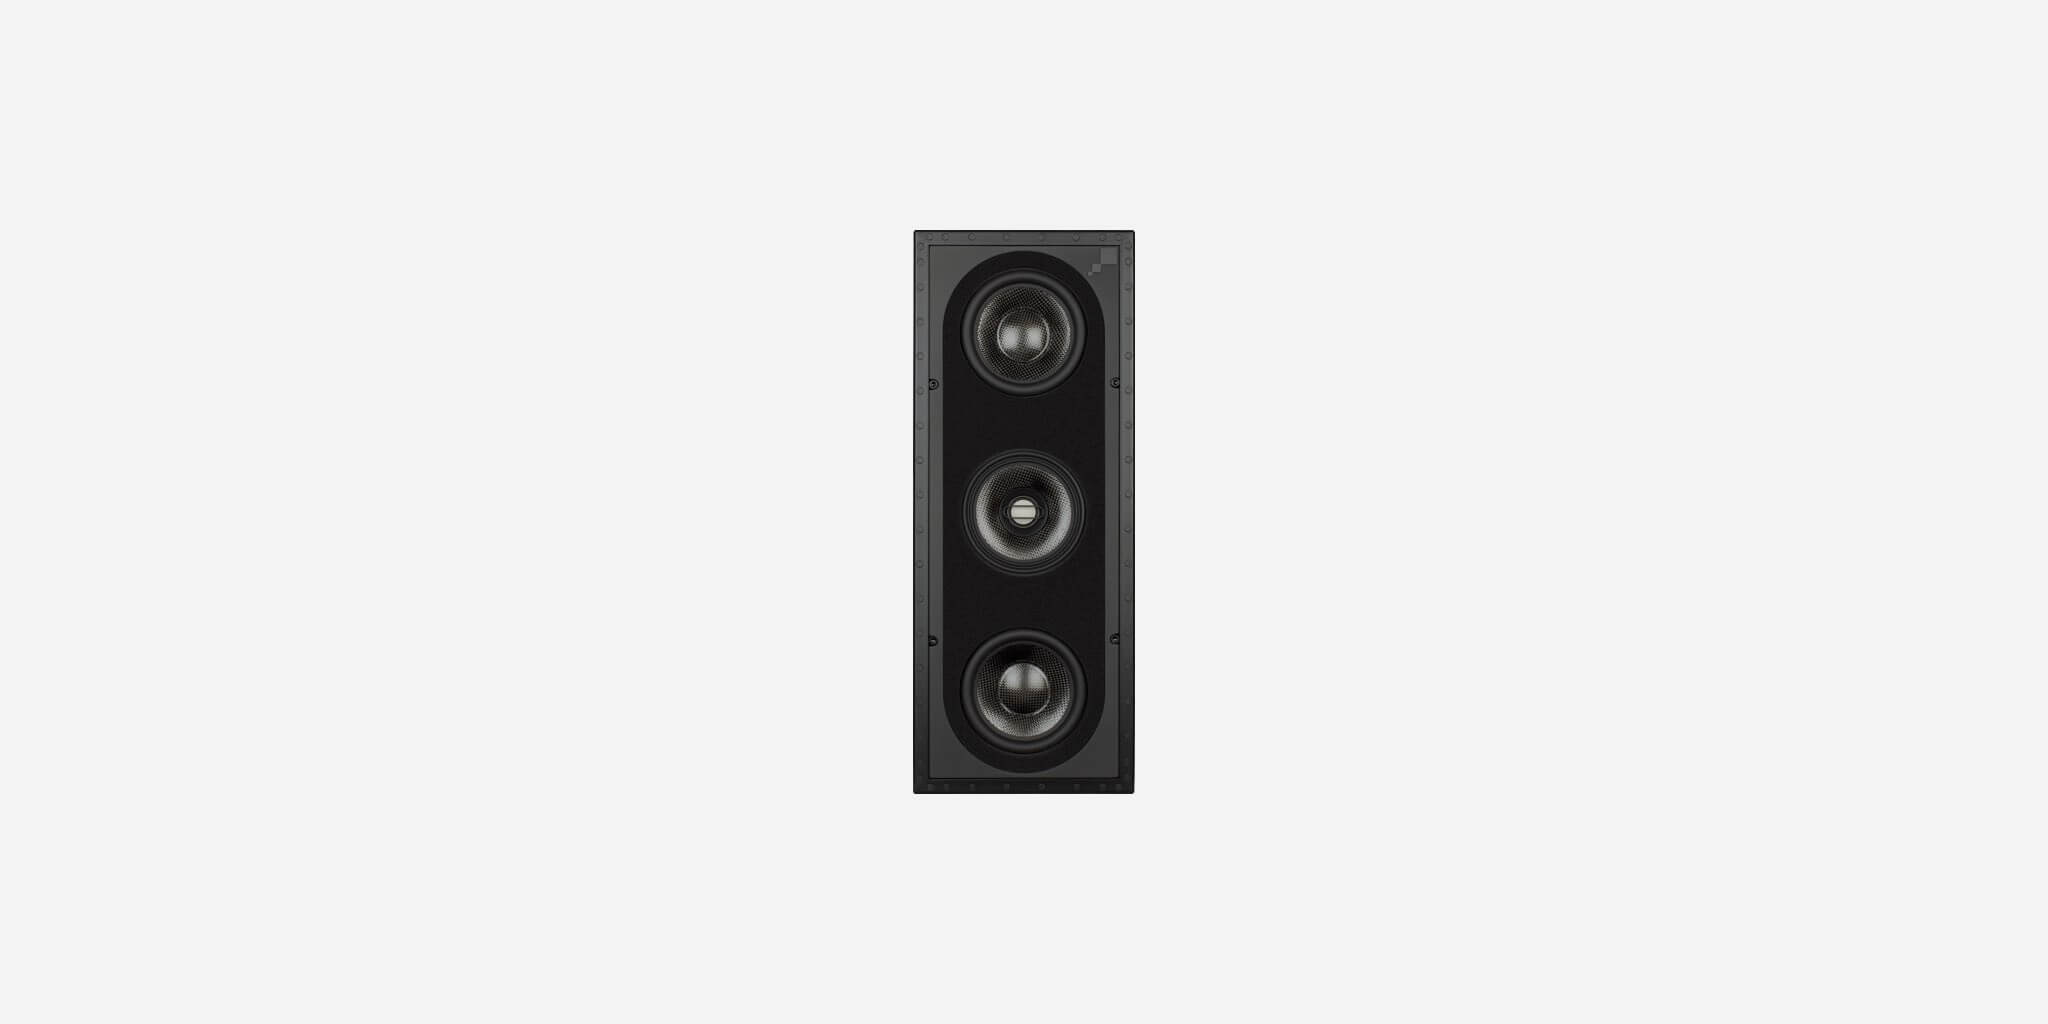 Sonance_Reference_Series_In-wall_R1_JPEG_2048x1024_60%